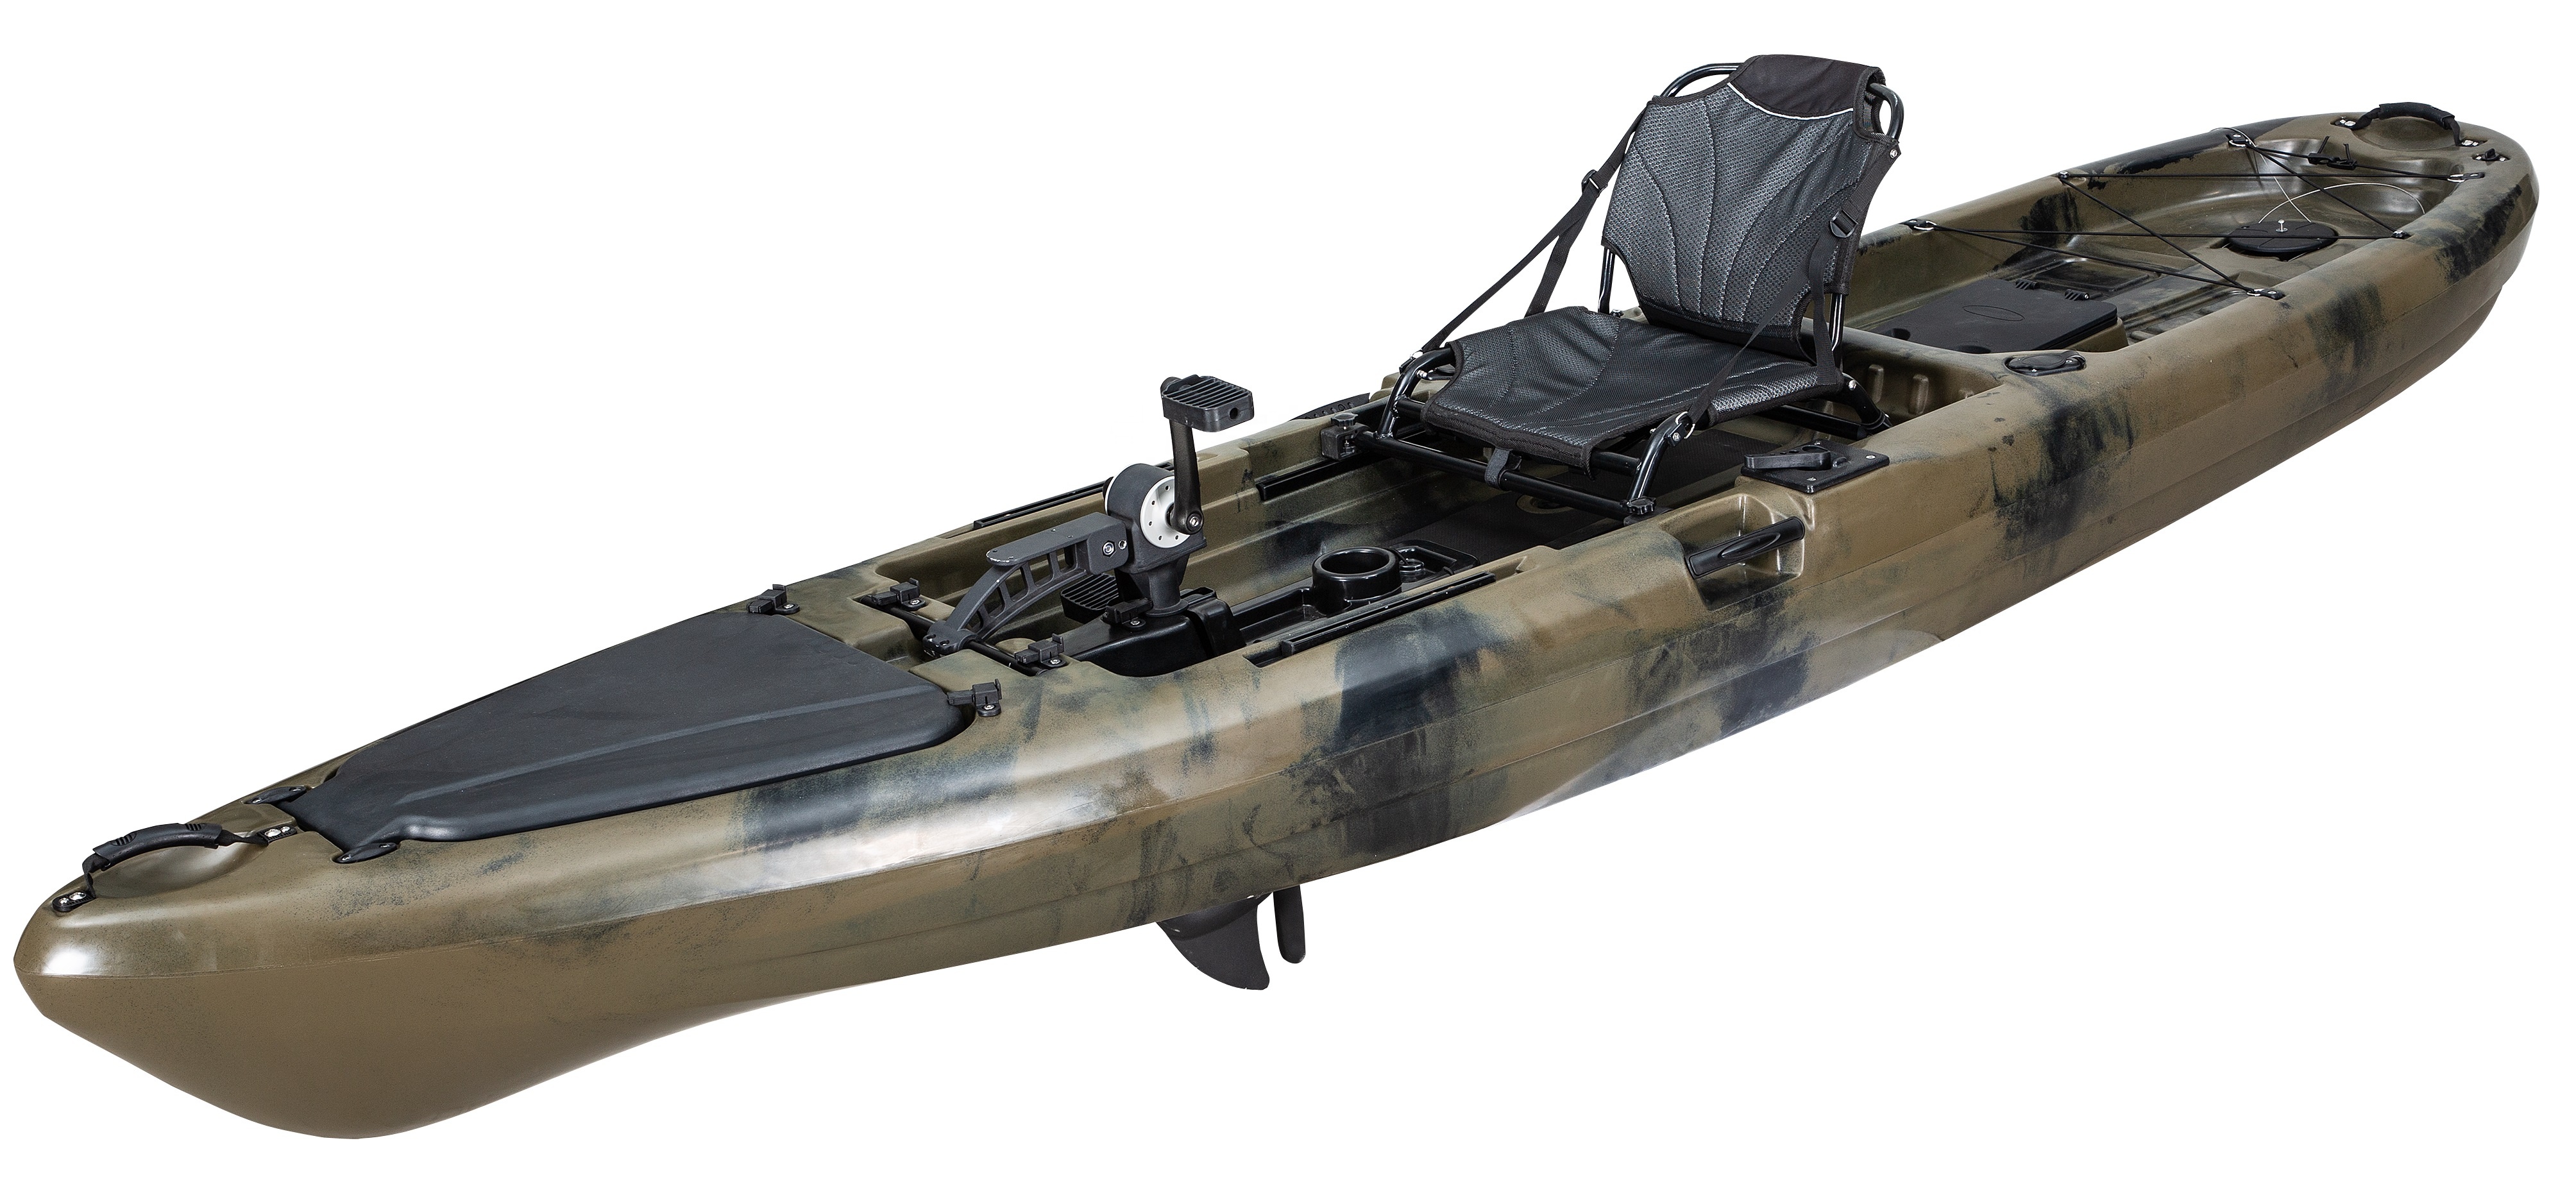 2020 China OEM wholesale sea pedal single fishing angler kayak sit on top with aluminum frame seat and kayak accessories